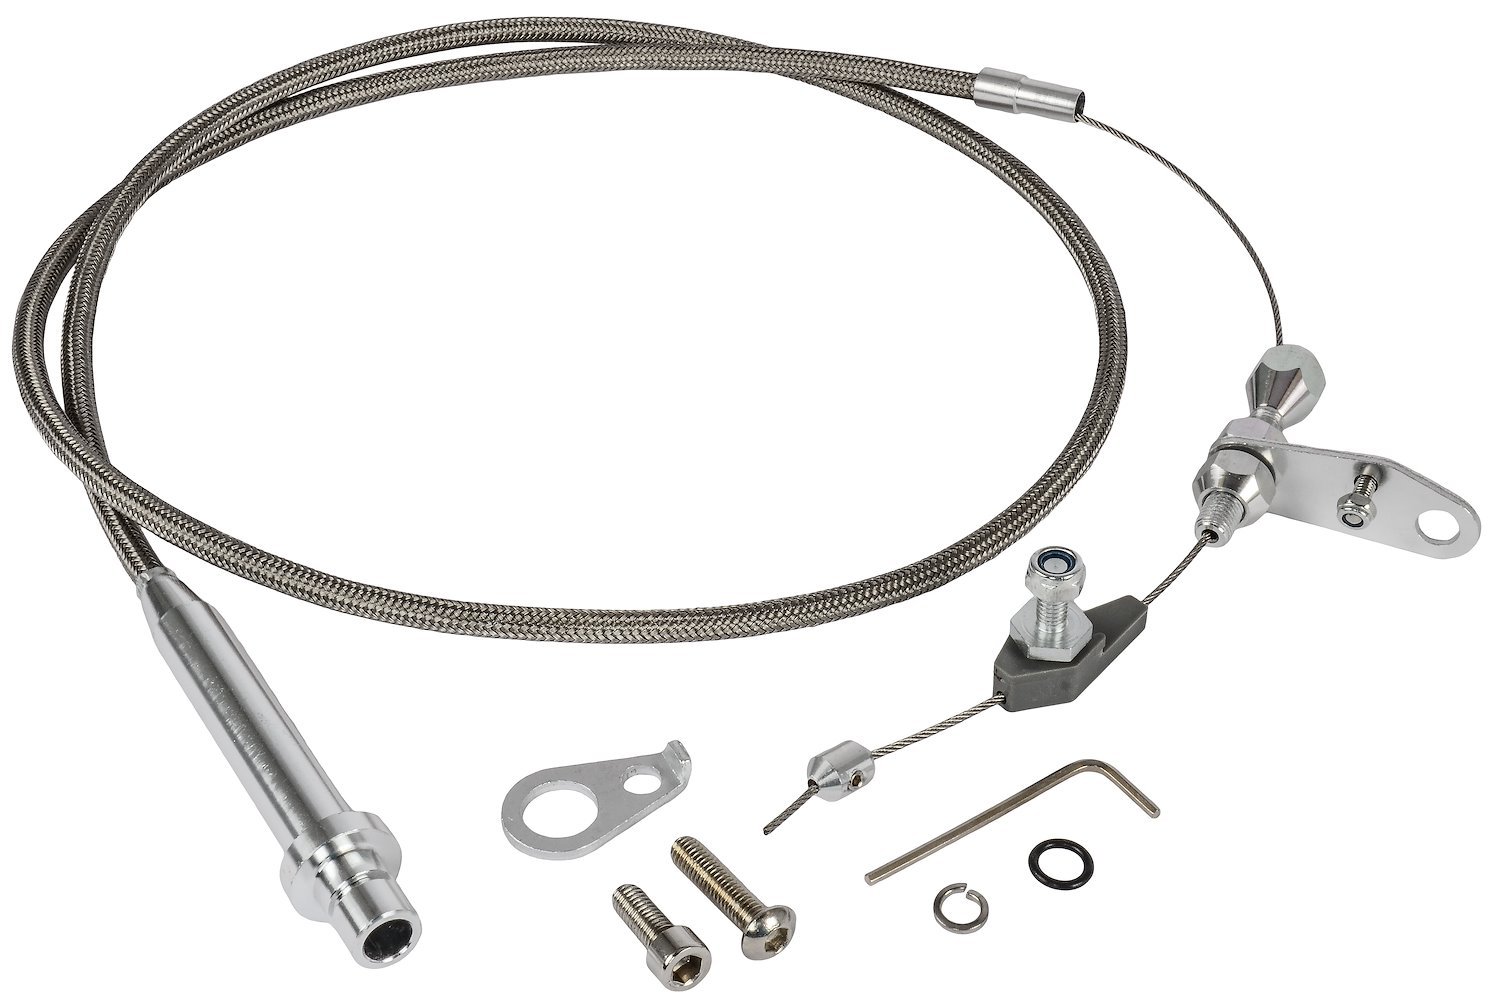 JEGS 157012: Transmission Kickdown Cable Kit | Small Block GMC/Chevy TH350  | Braided Stainless Steel Cable Jacket | Includes: Aluminum Fittings &  Polished Ferrule - JEGS High Performance